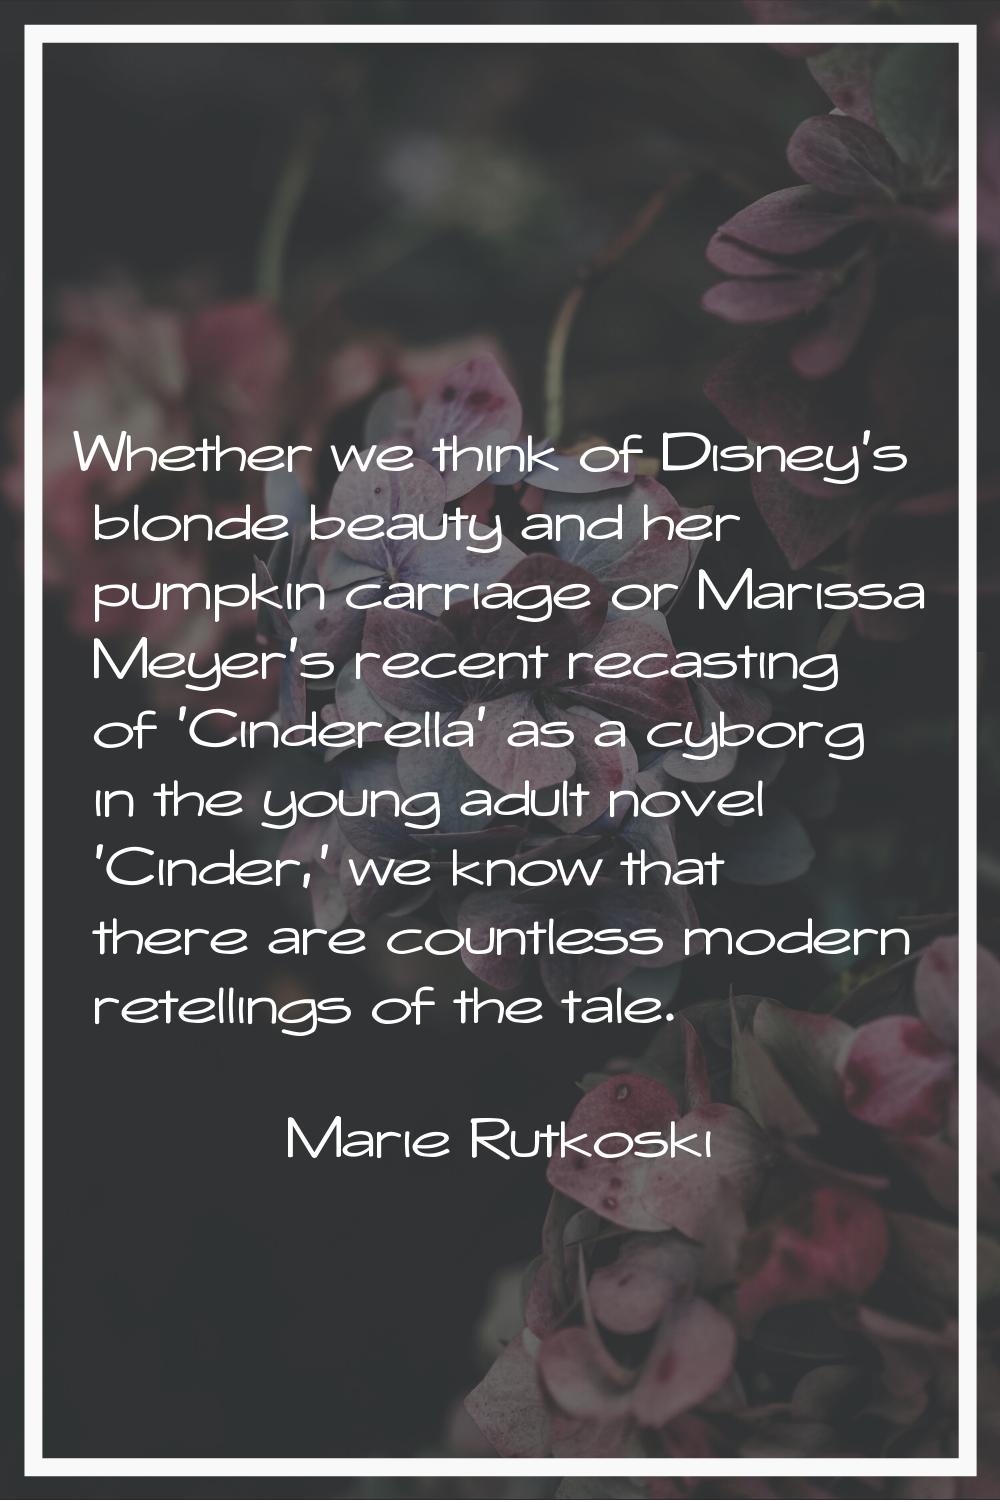 Whether we think of Disney's blonde beauty and her pumpkin carriage or Marissa Meyer's recent recas